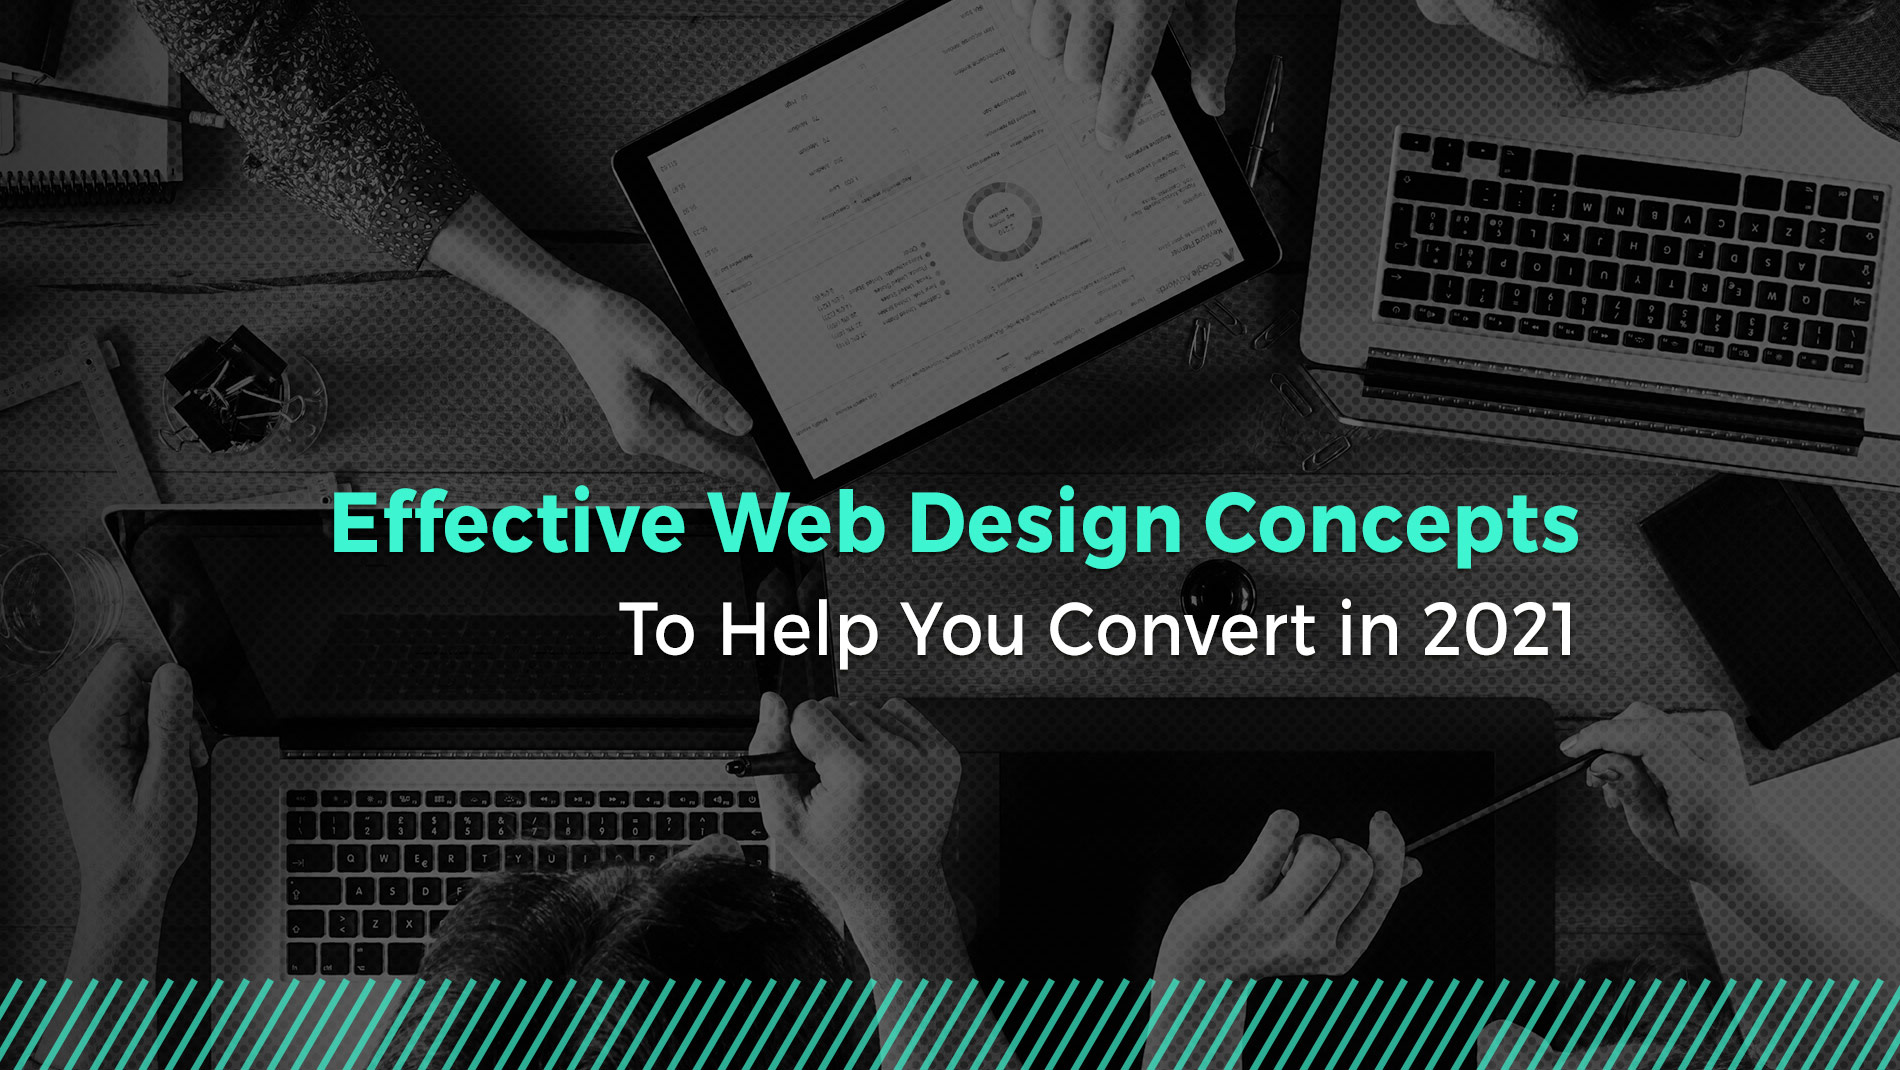 Effective Web Design Concepts to Help You Convert in 2021